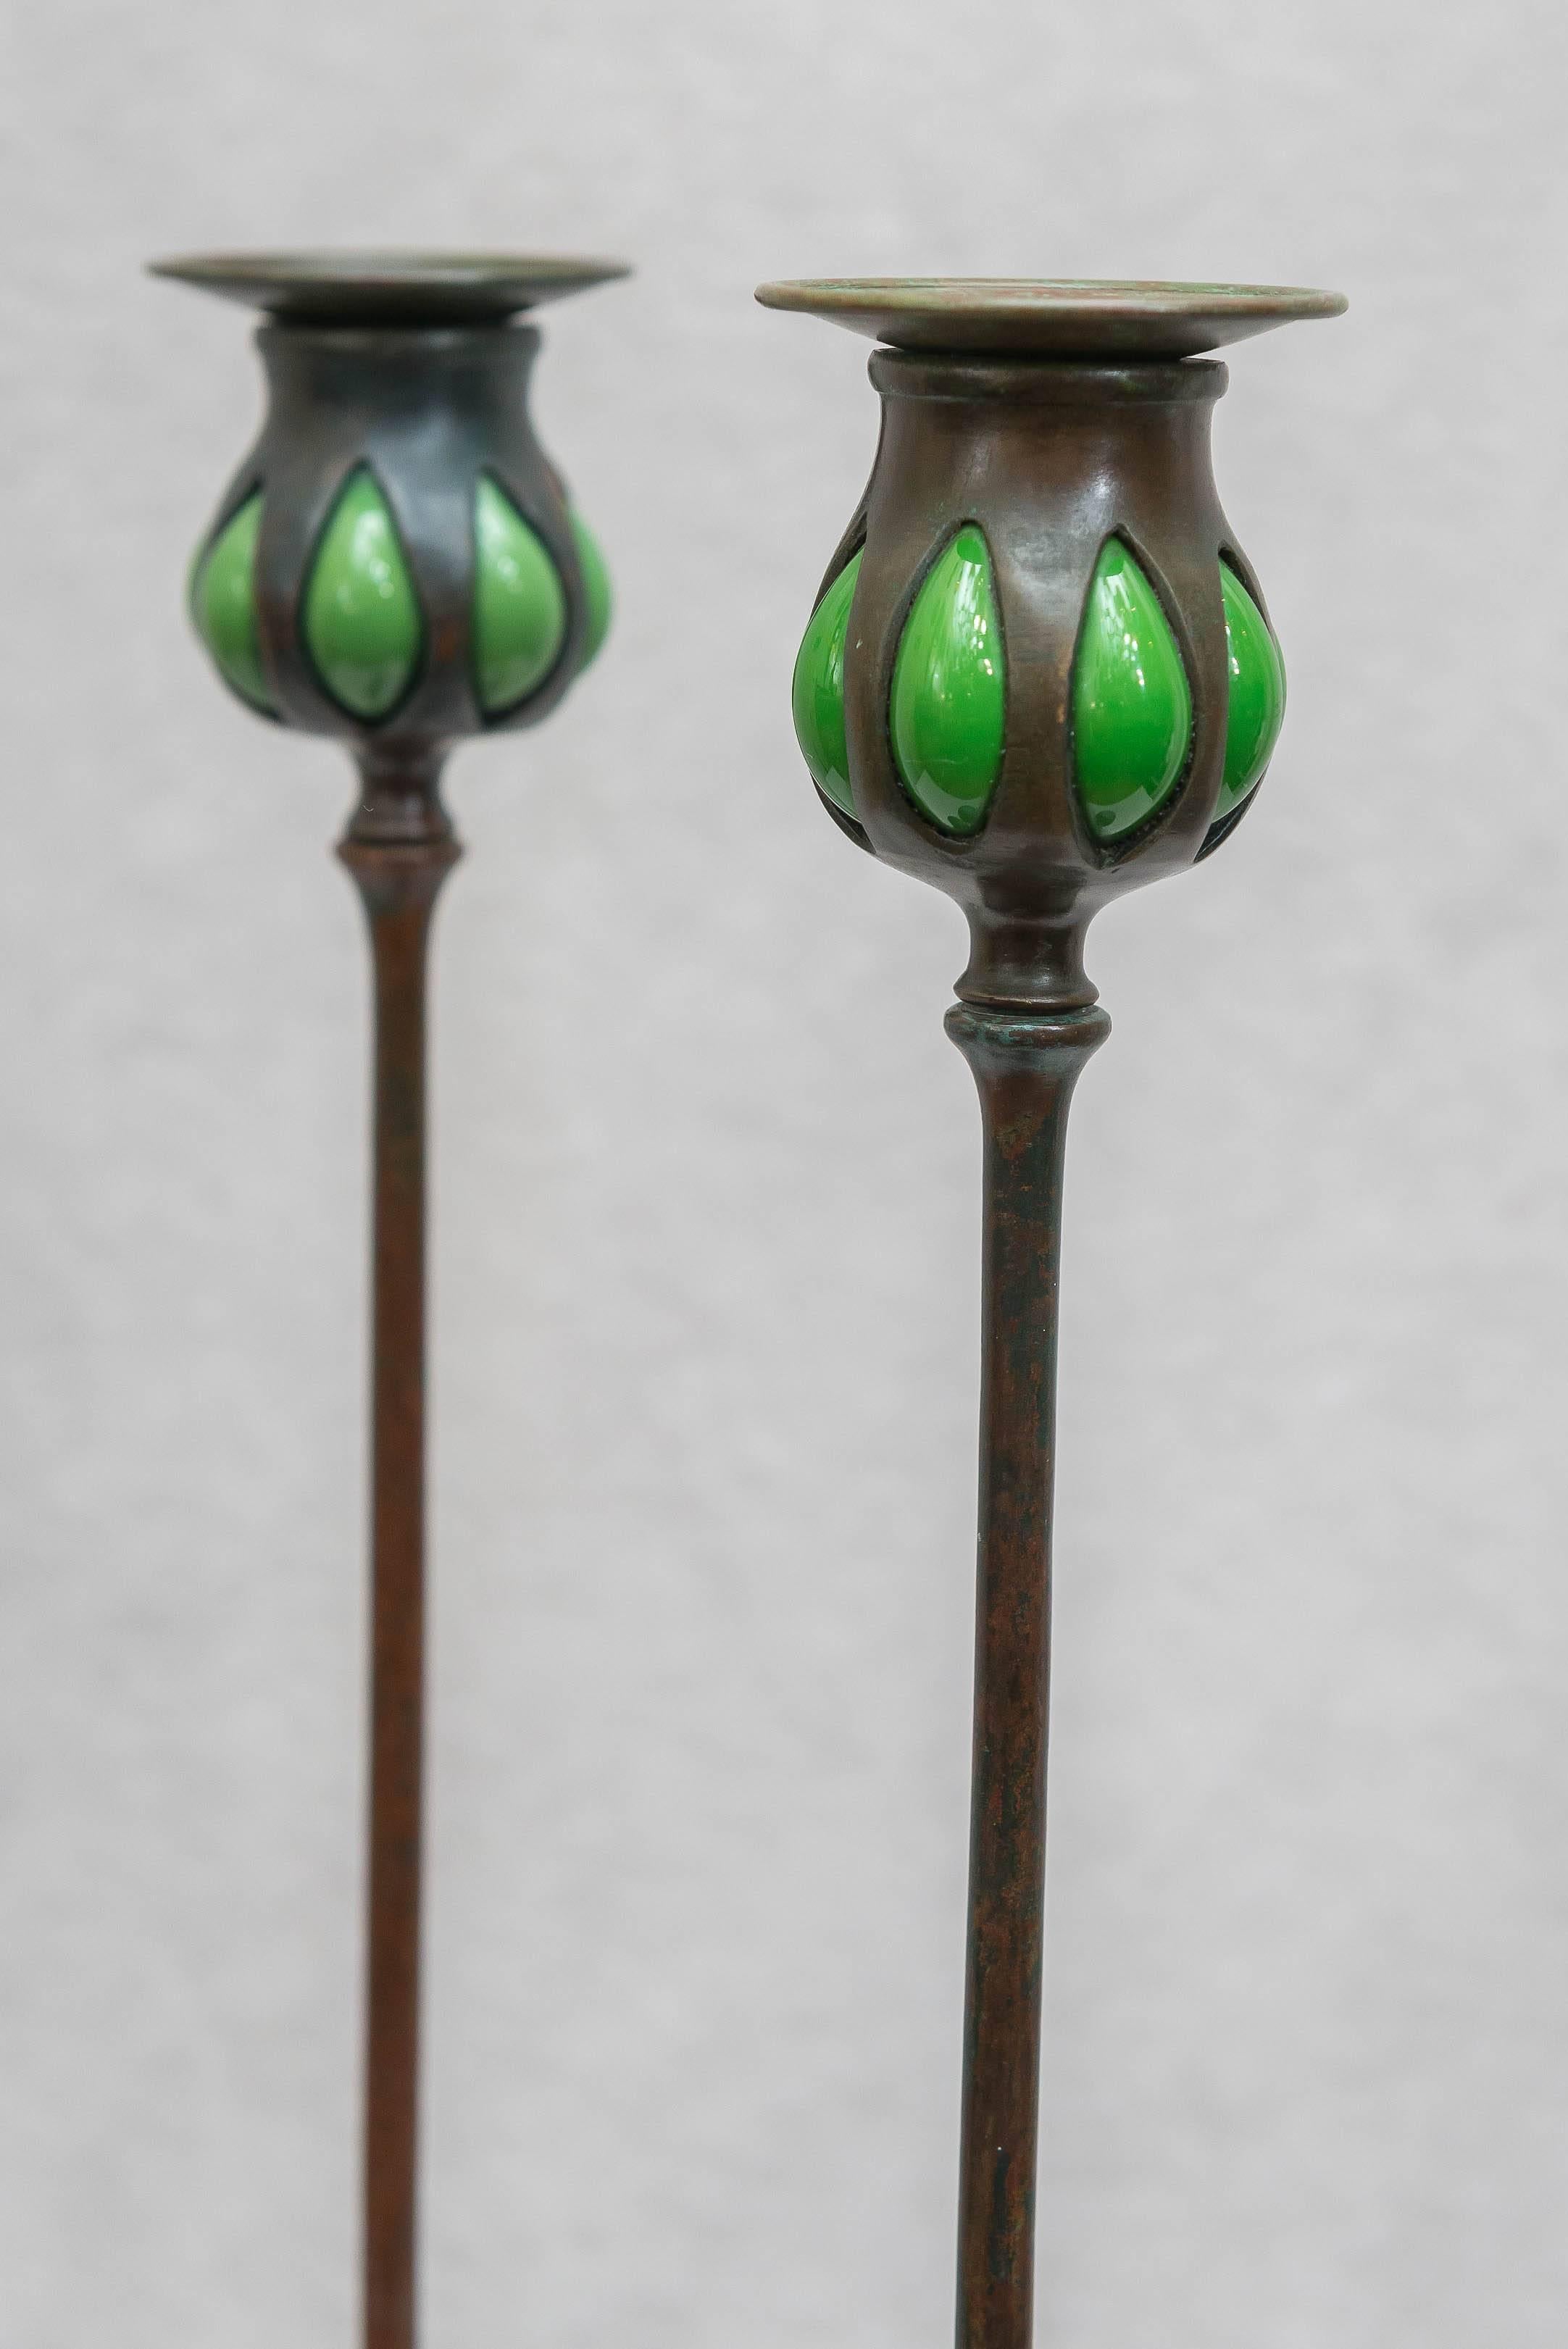 I am sure do not have to tell you much about Tiffany Studios. Their name suggests the best you can buy. Here are a handsome and graceful pair of properly signed Tiffany candlesticks. The added bonus here is the glass that adorns these candlesticks.